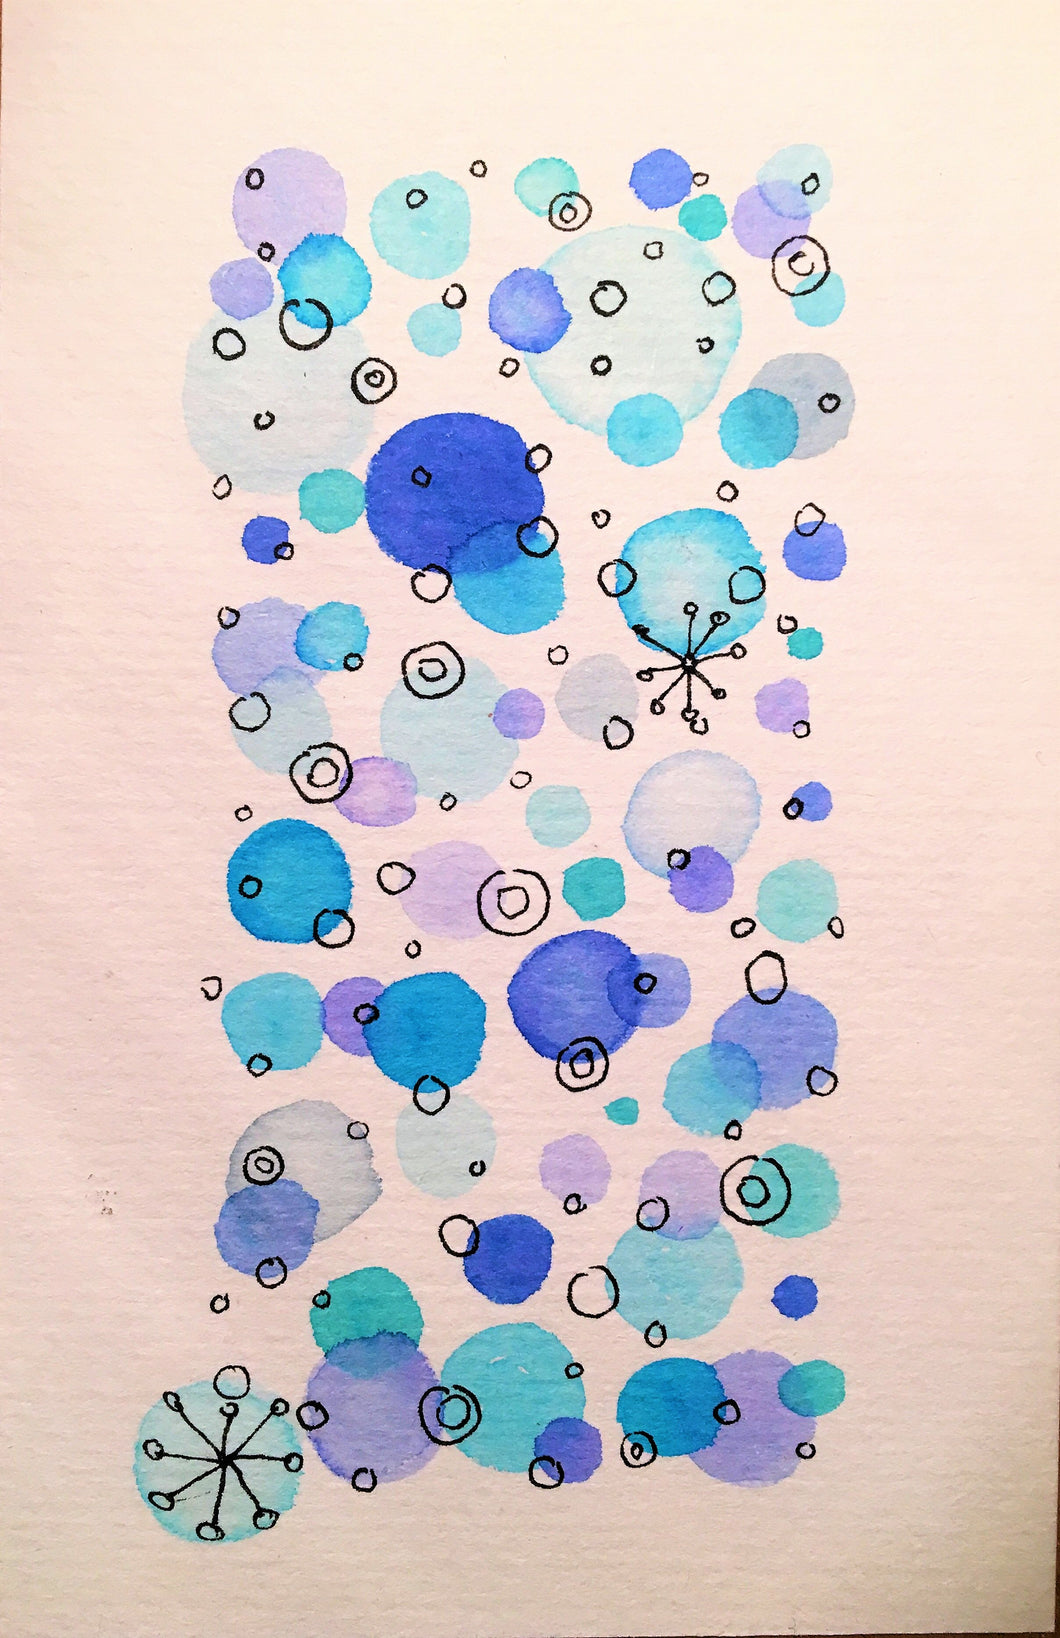 Handpainted Watercolour Greeting Card - Abstract Blue/Turquoise and Ink Circle Design - eDgE dEsiGn London